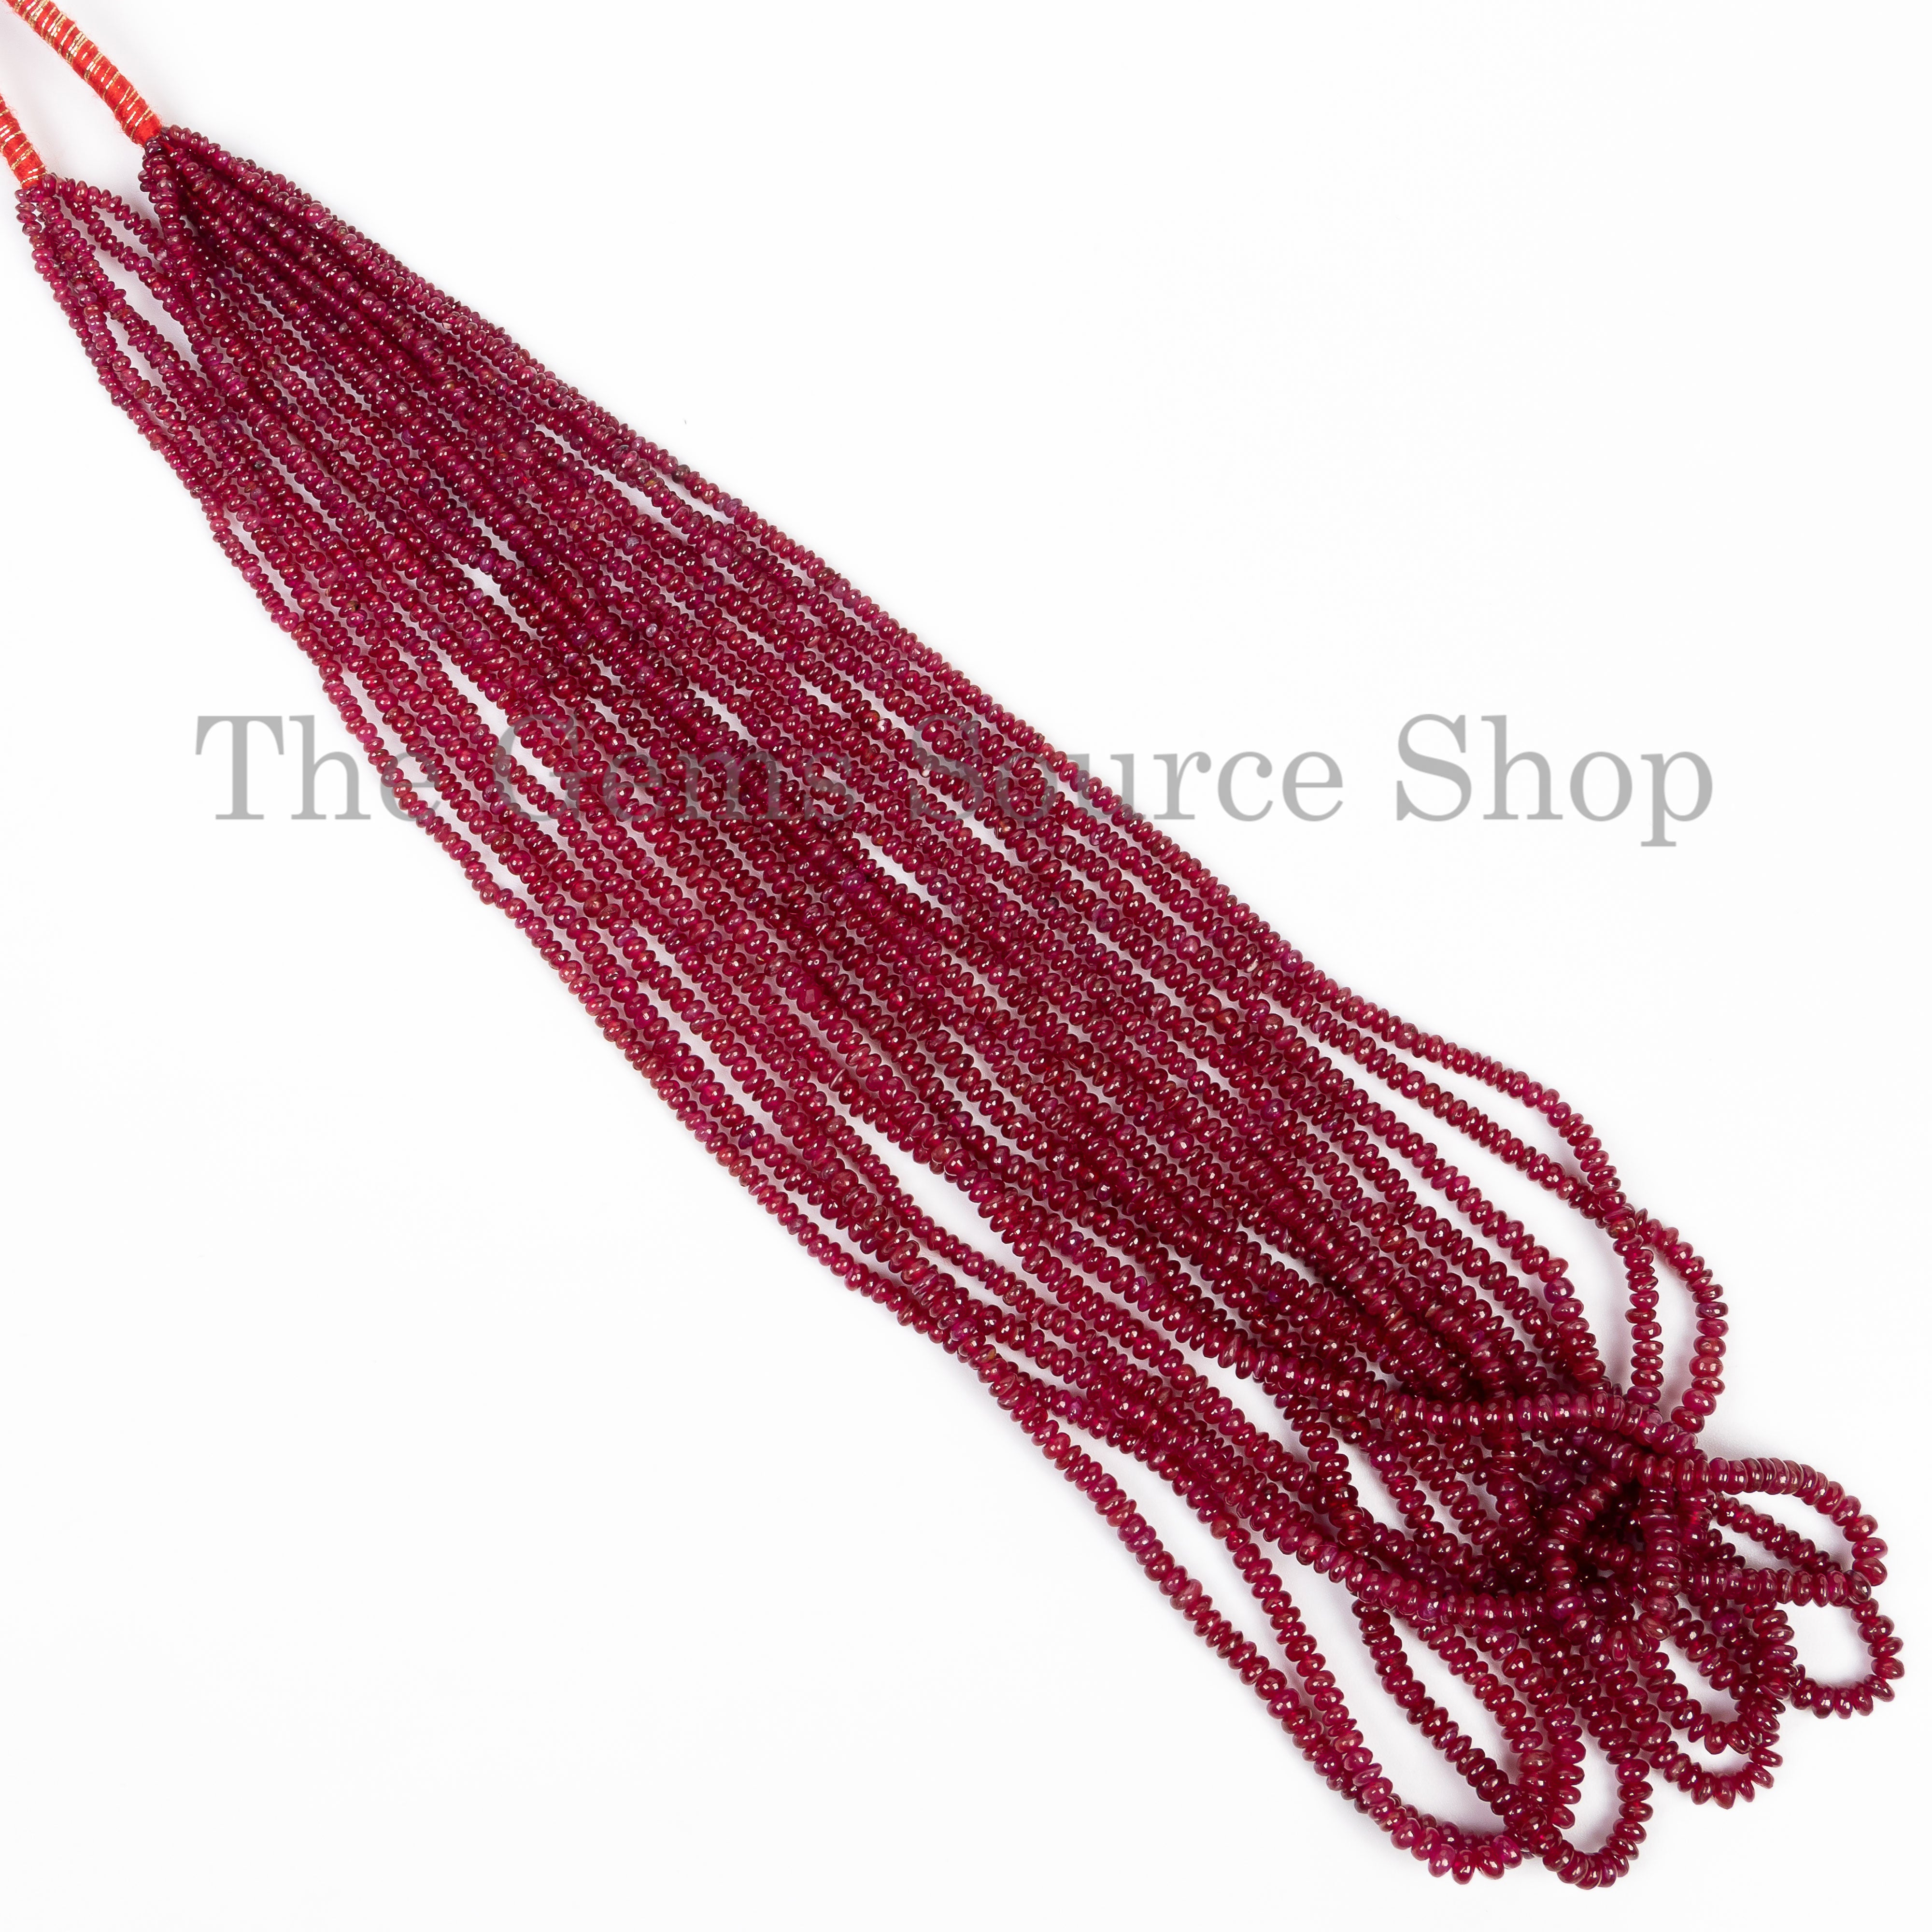 2-3mm Longido Ruby Smooth Rondelle Beads Strand For Jewelry Making